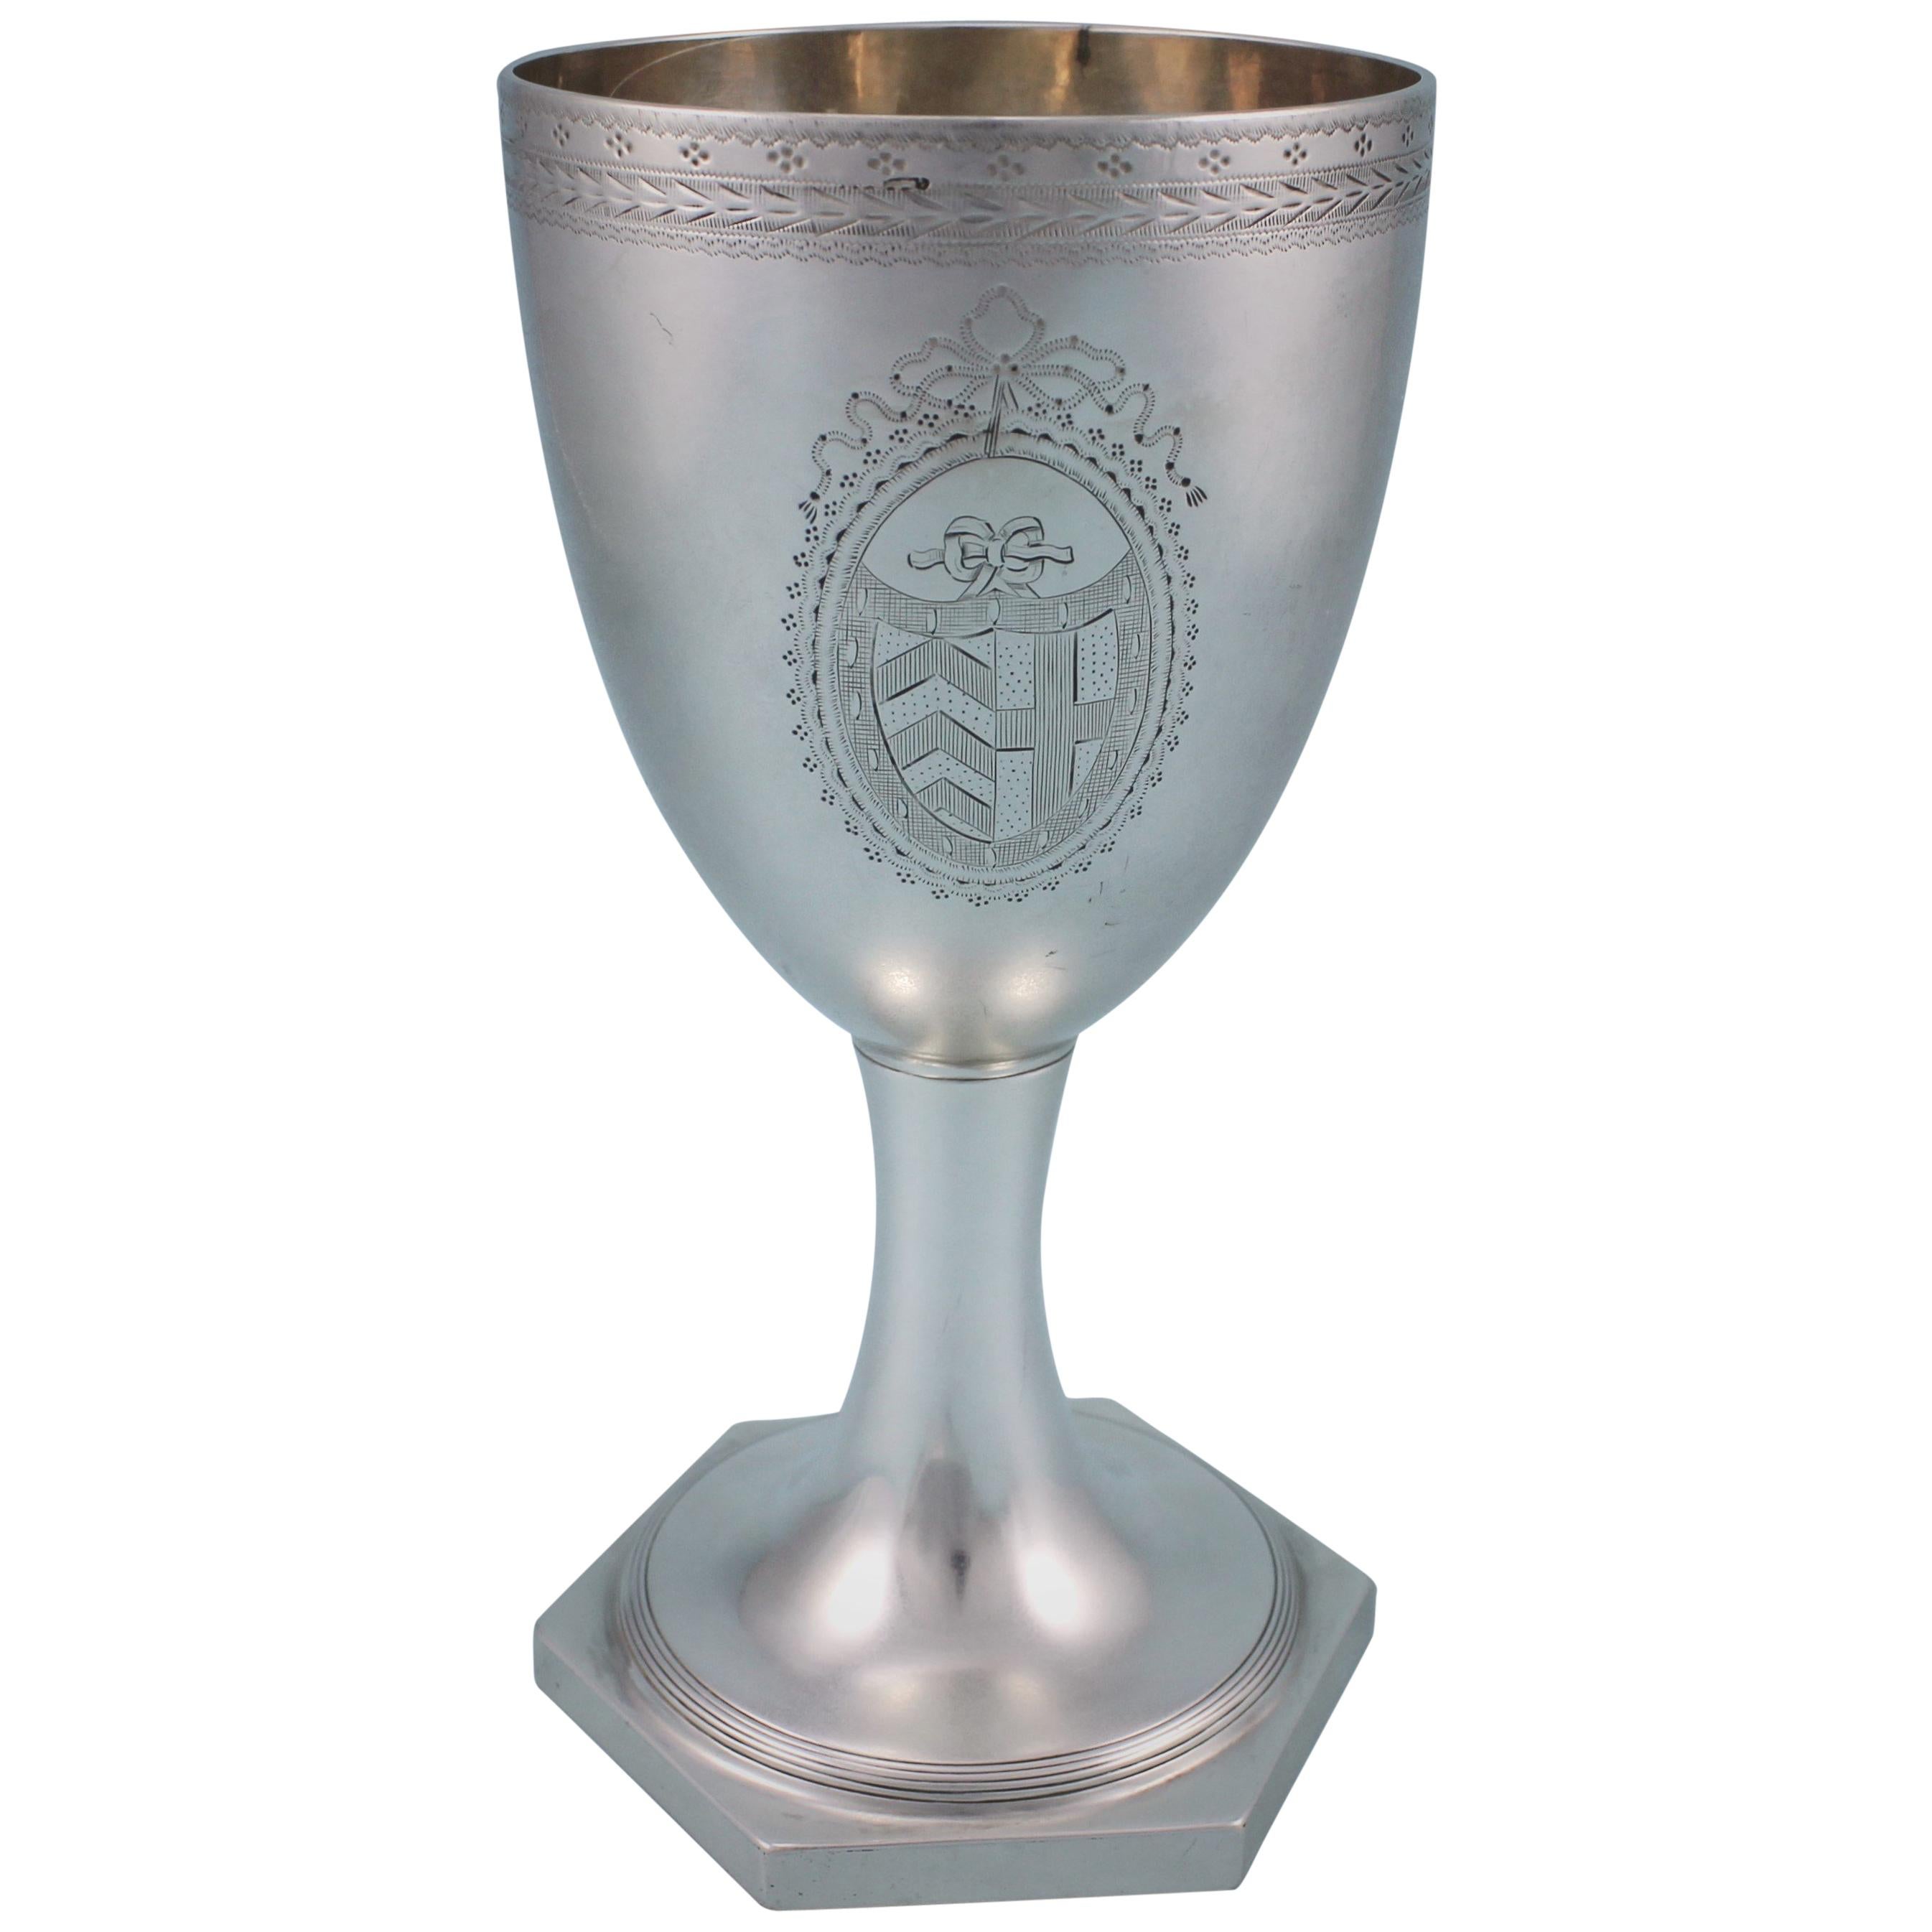 Victorian Sterling Silver Cup on Hexagonal Foot, London, 1869 For Sale